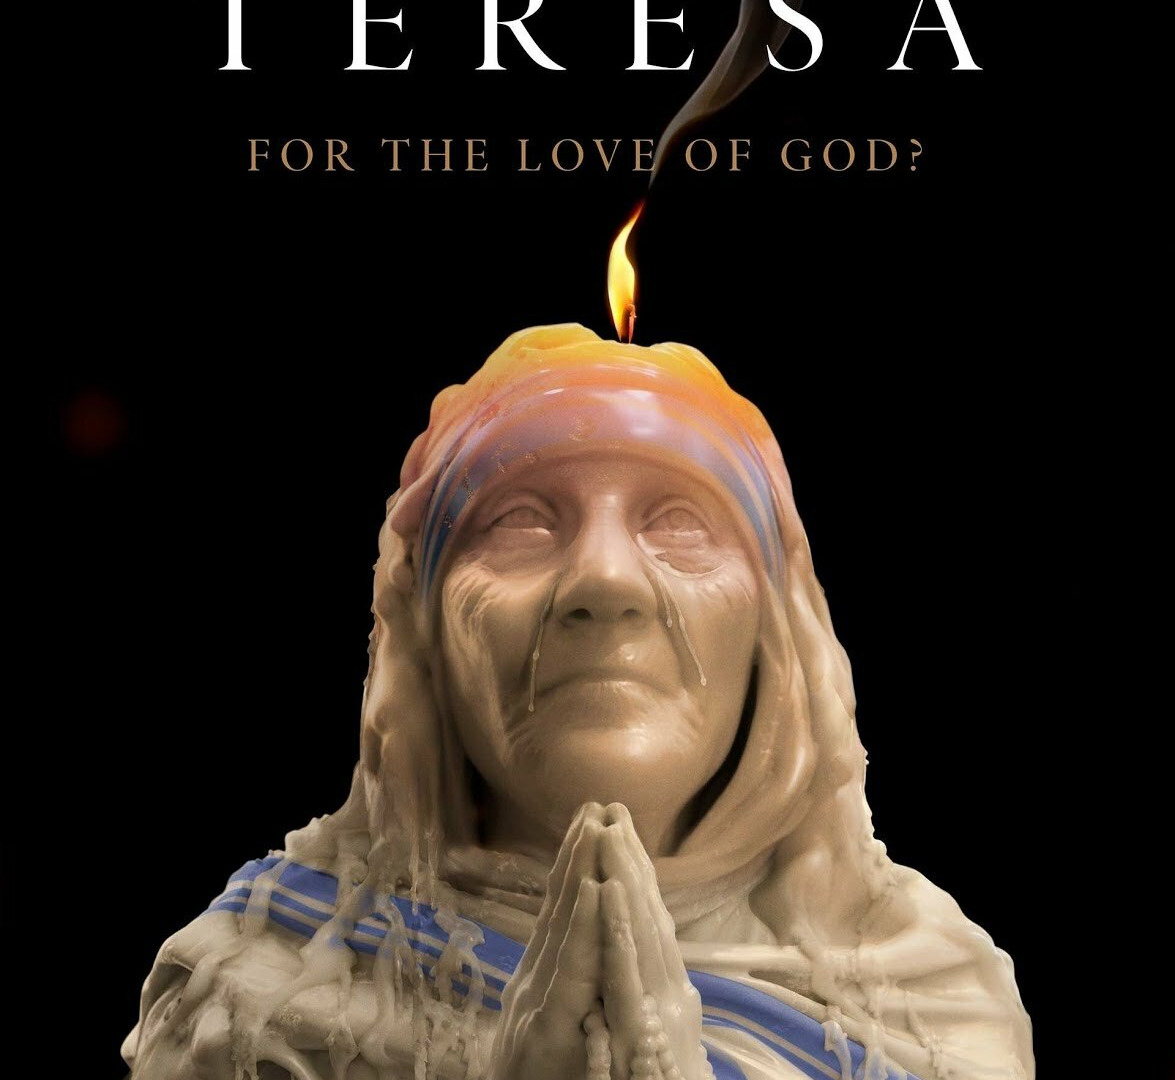 Show Mother Teresa: For the Love of God?